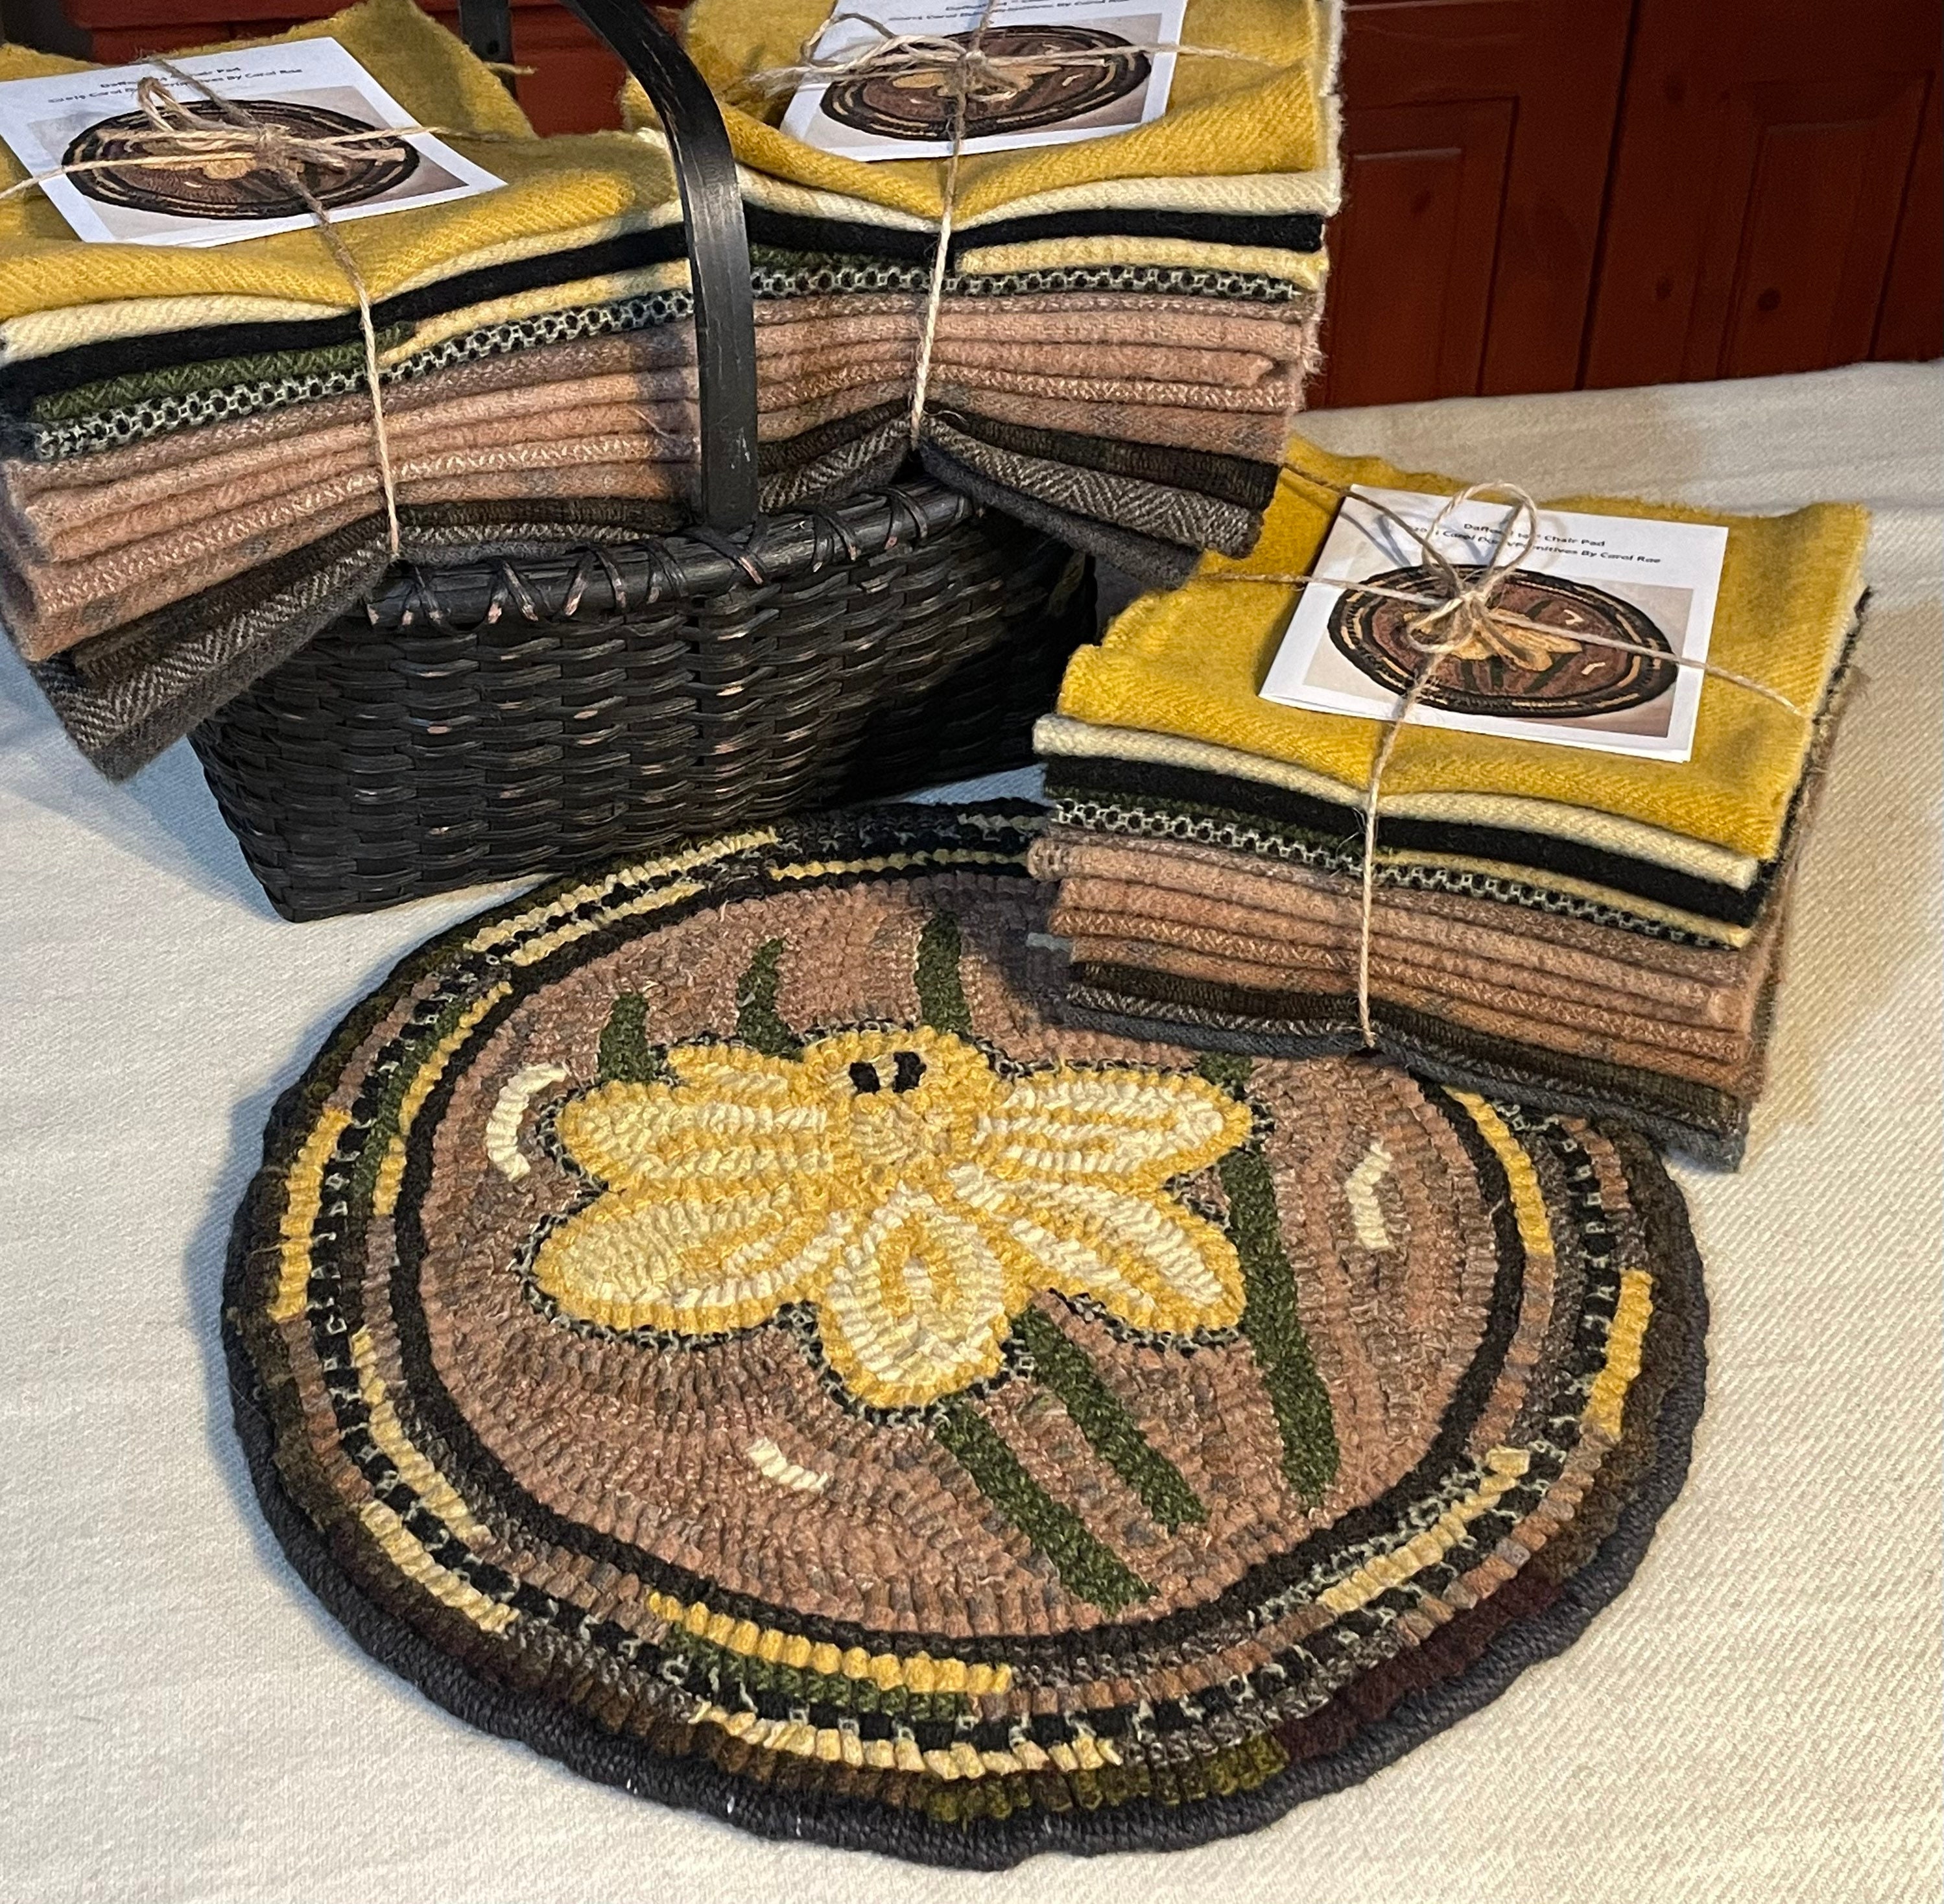 Daffodil Chair Pad, Rug Hooking Kit on Monks Cloth or Primitive Linen,  Table Mat, Wall Hanging, 14 inch Round Hooked Rug, K103